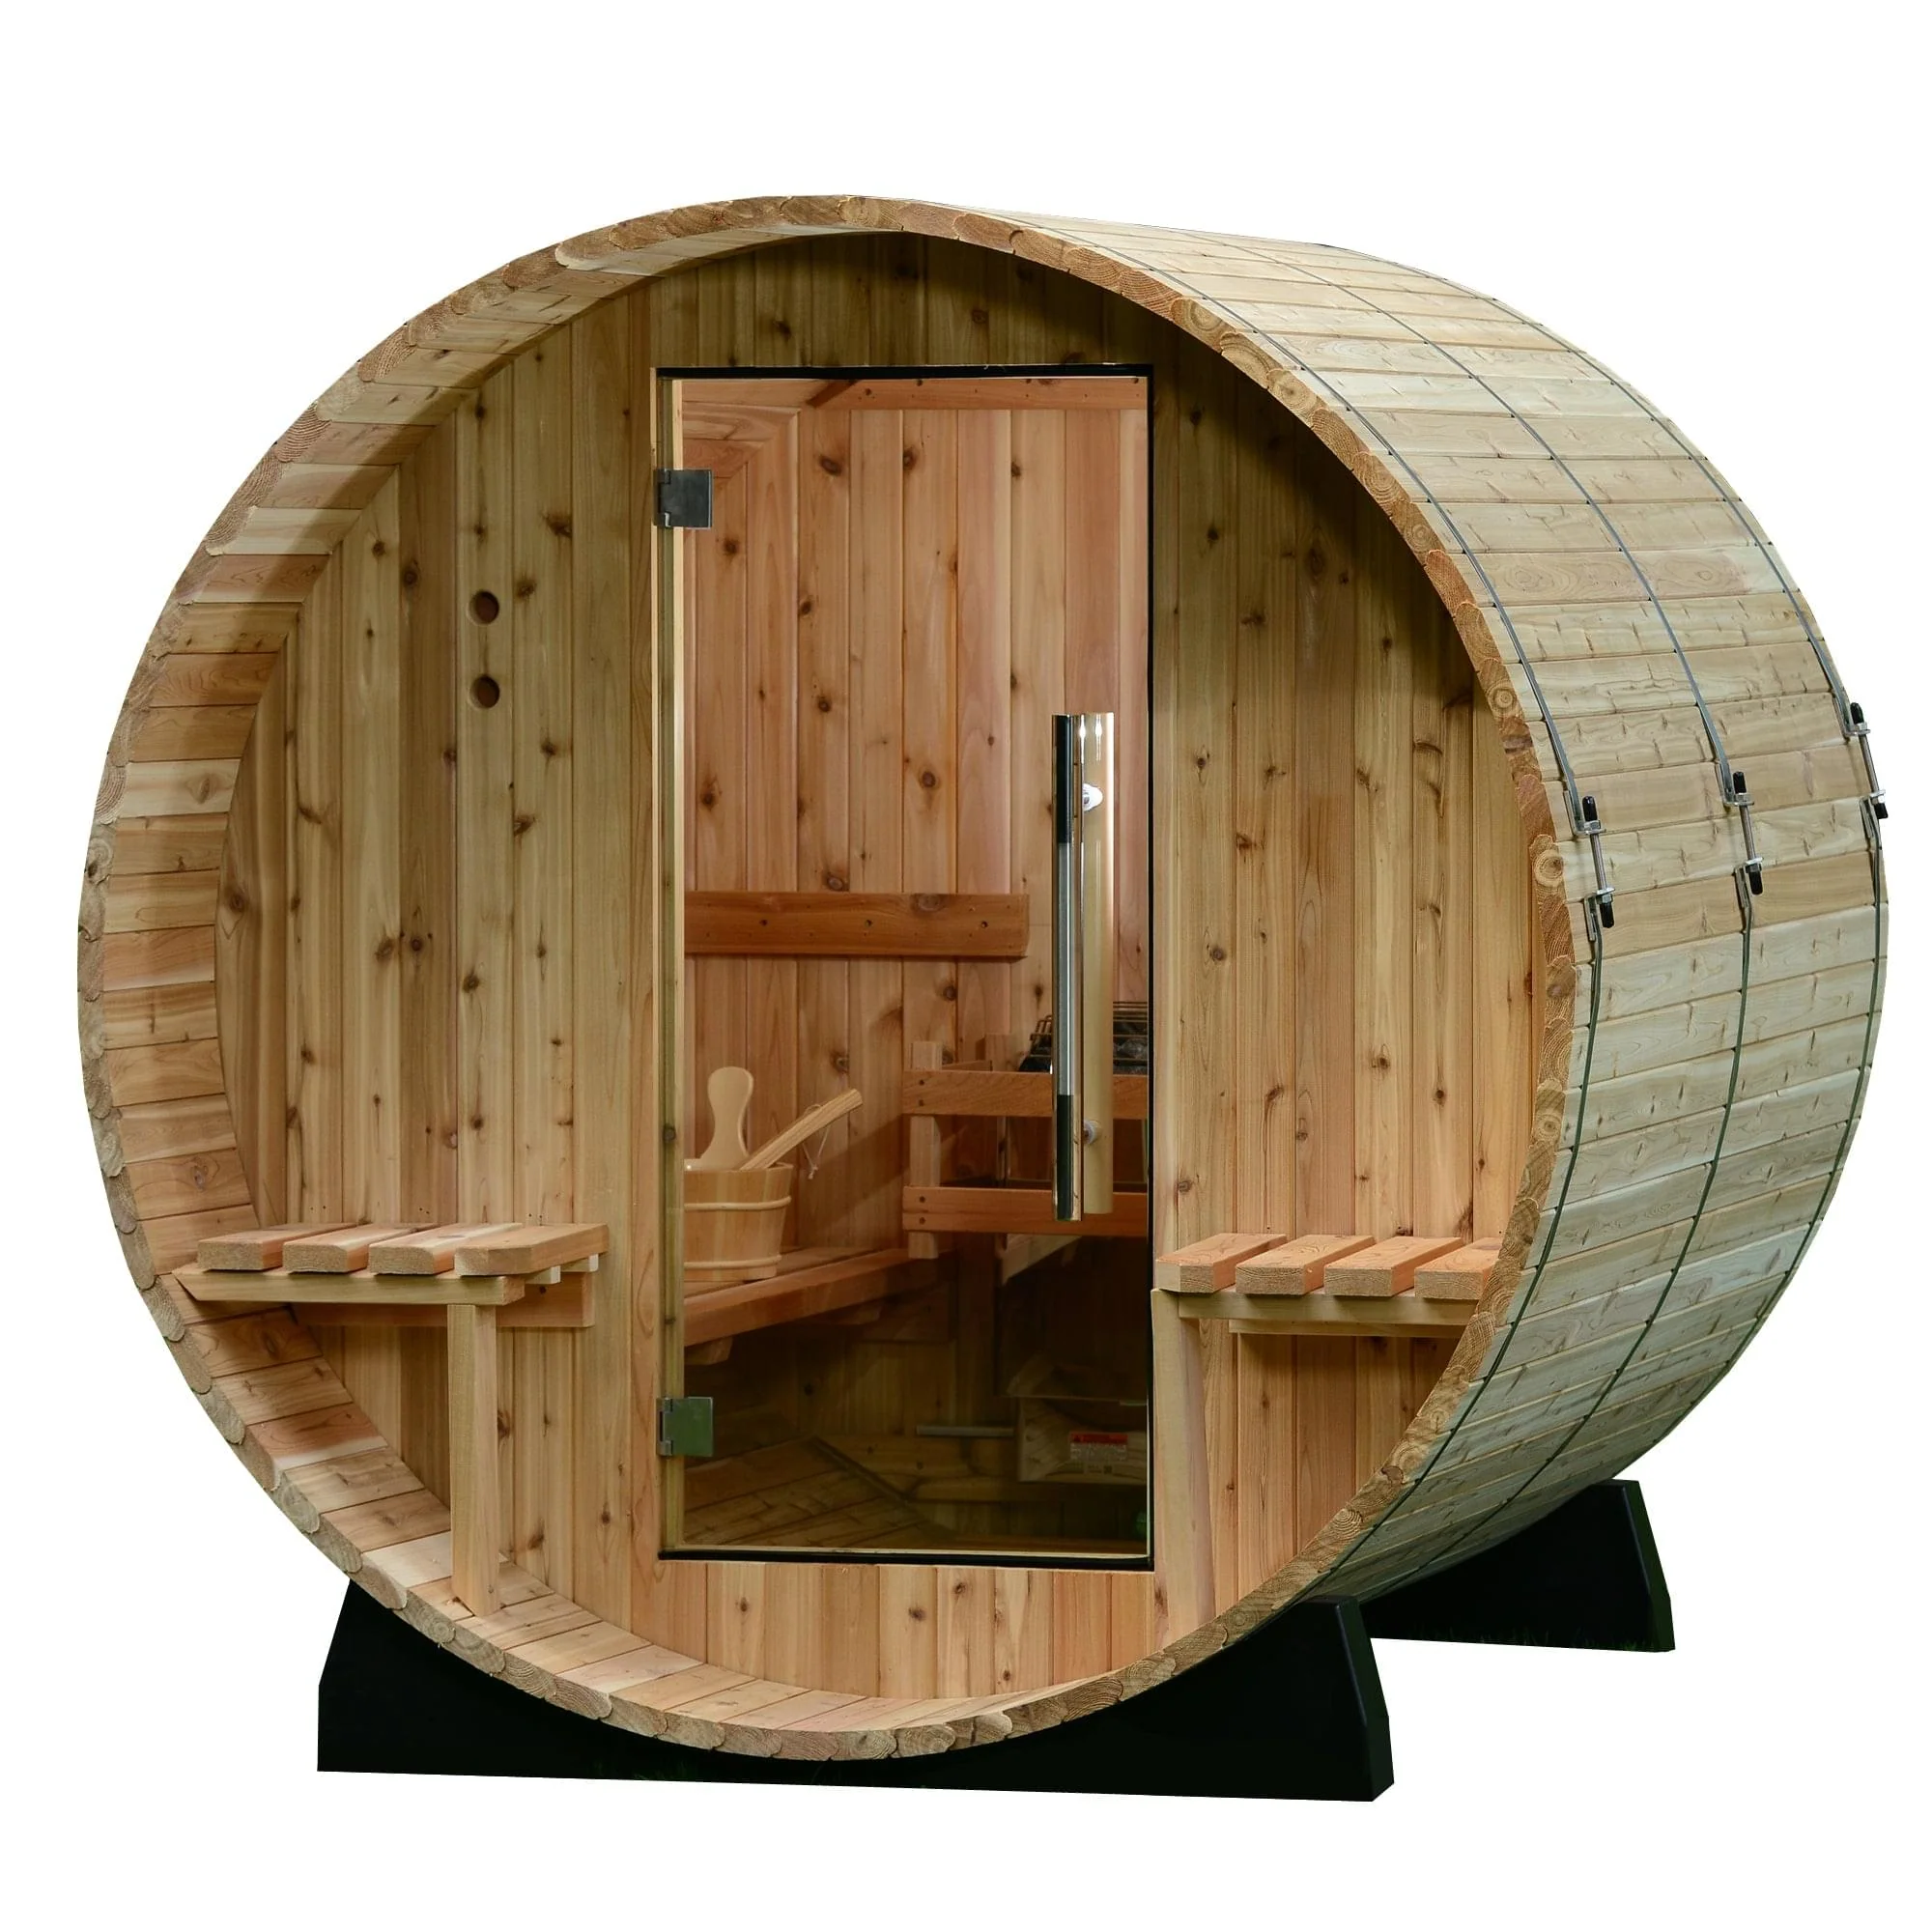 Audra, a barrel-shaped 2–4 person wood sauna with small benches, a canopy, and a glass door